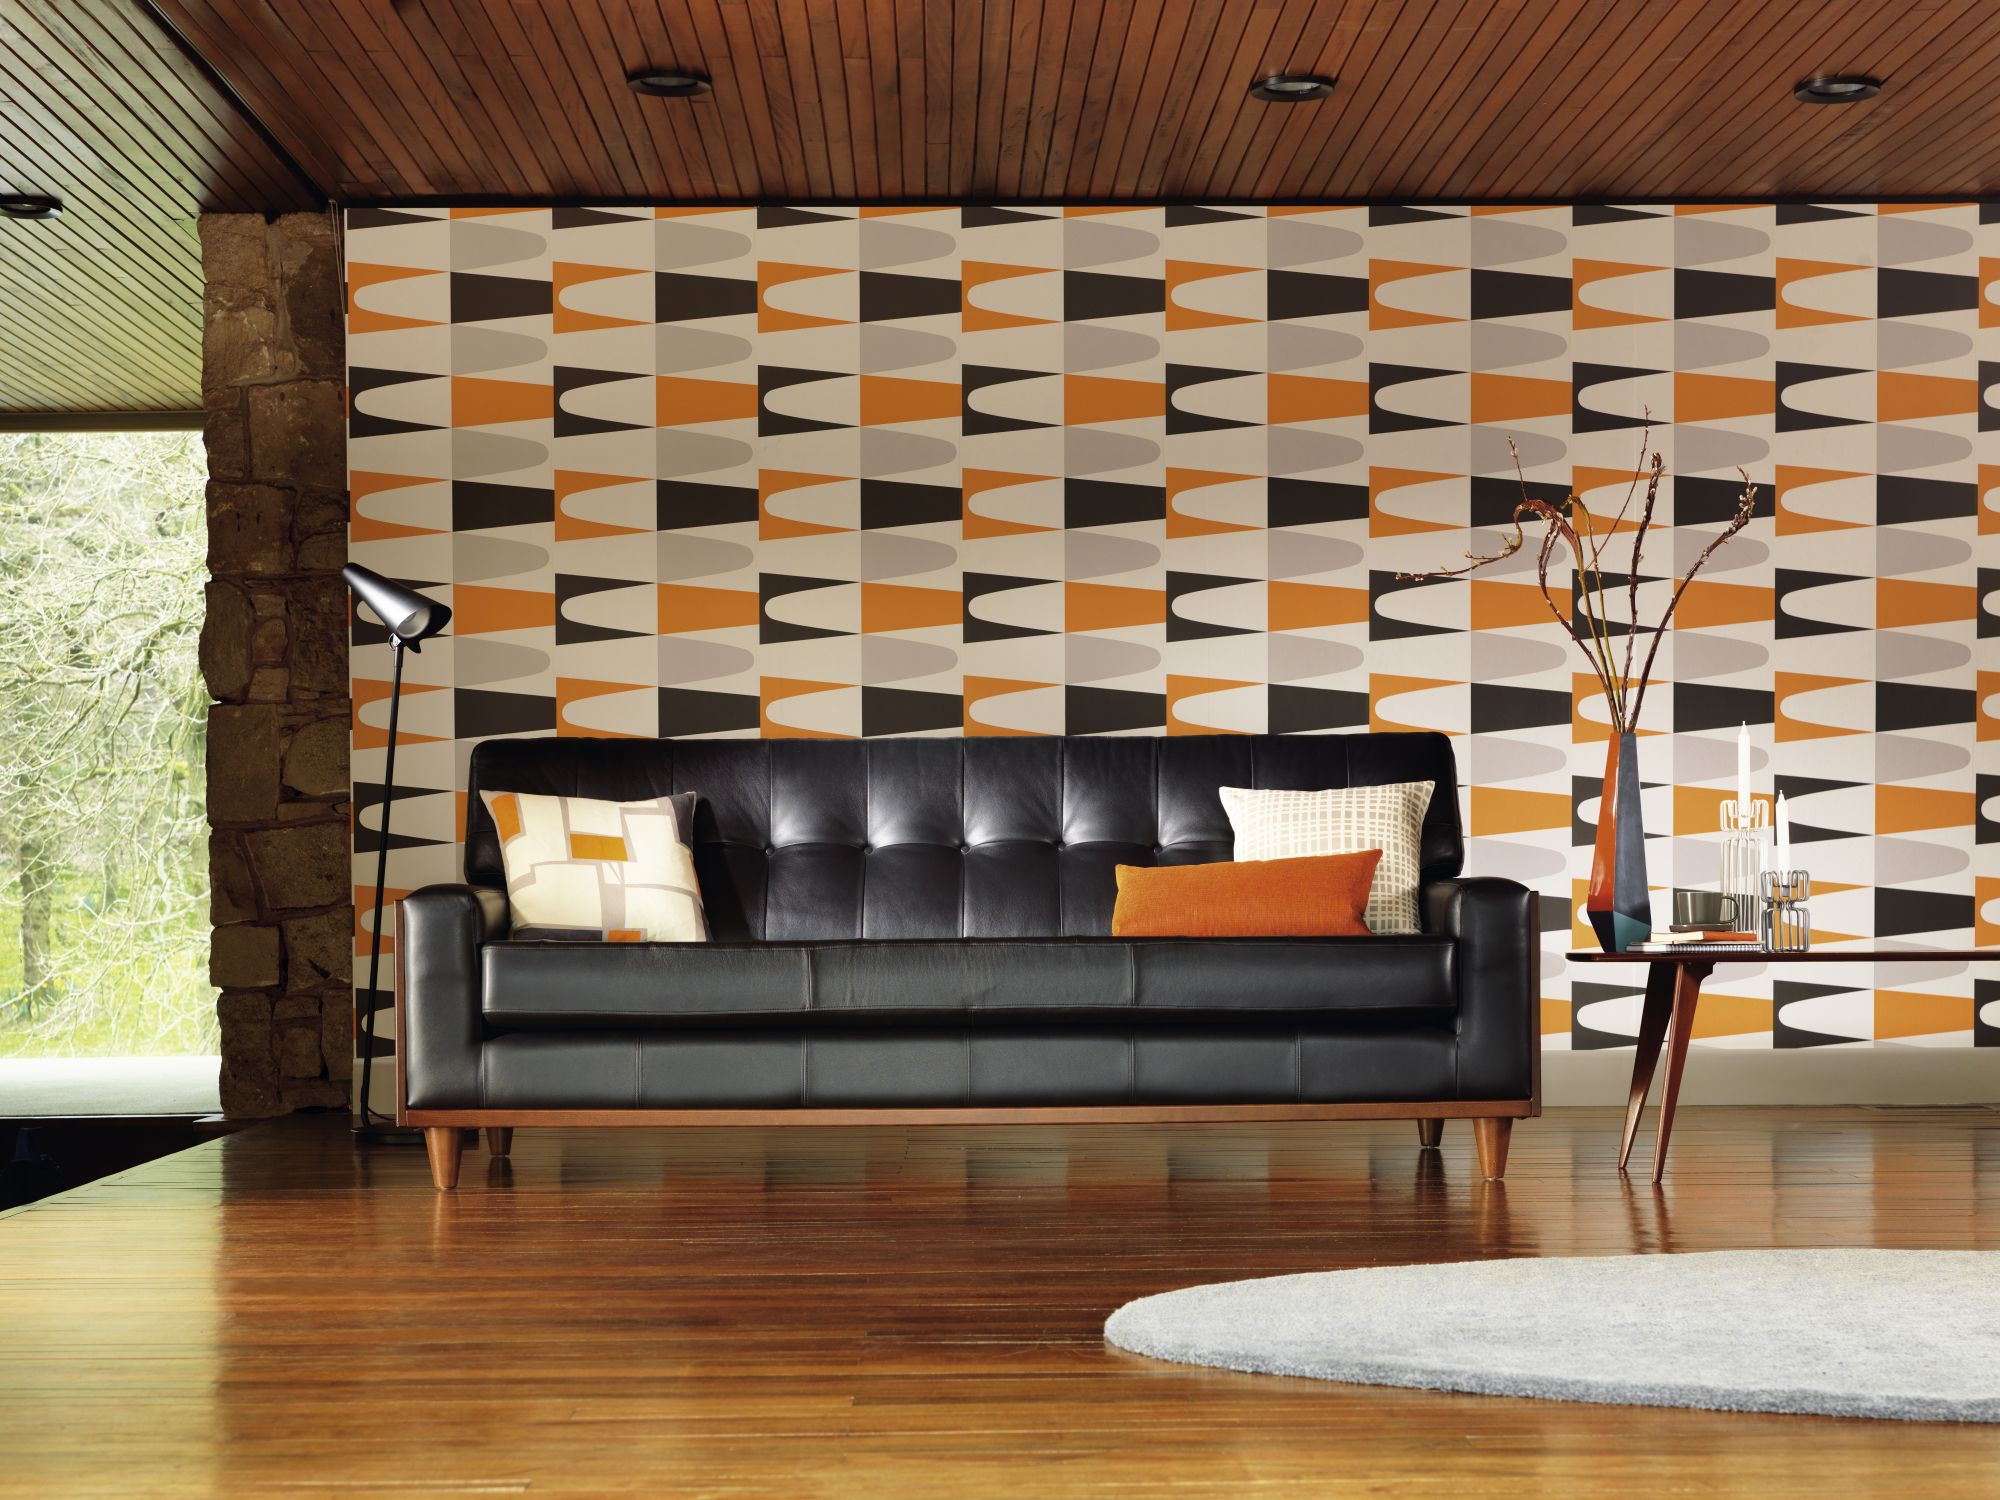 image of the G plan sofa which has a retro look to it due to the black leather sofa with orange cushions and geometric background